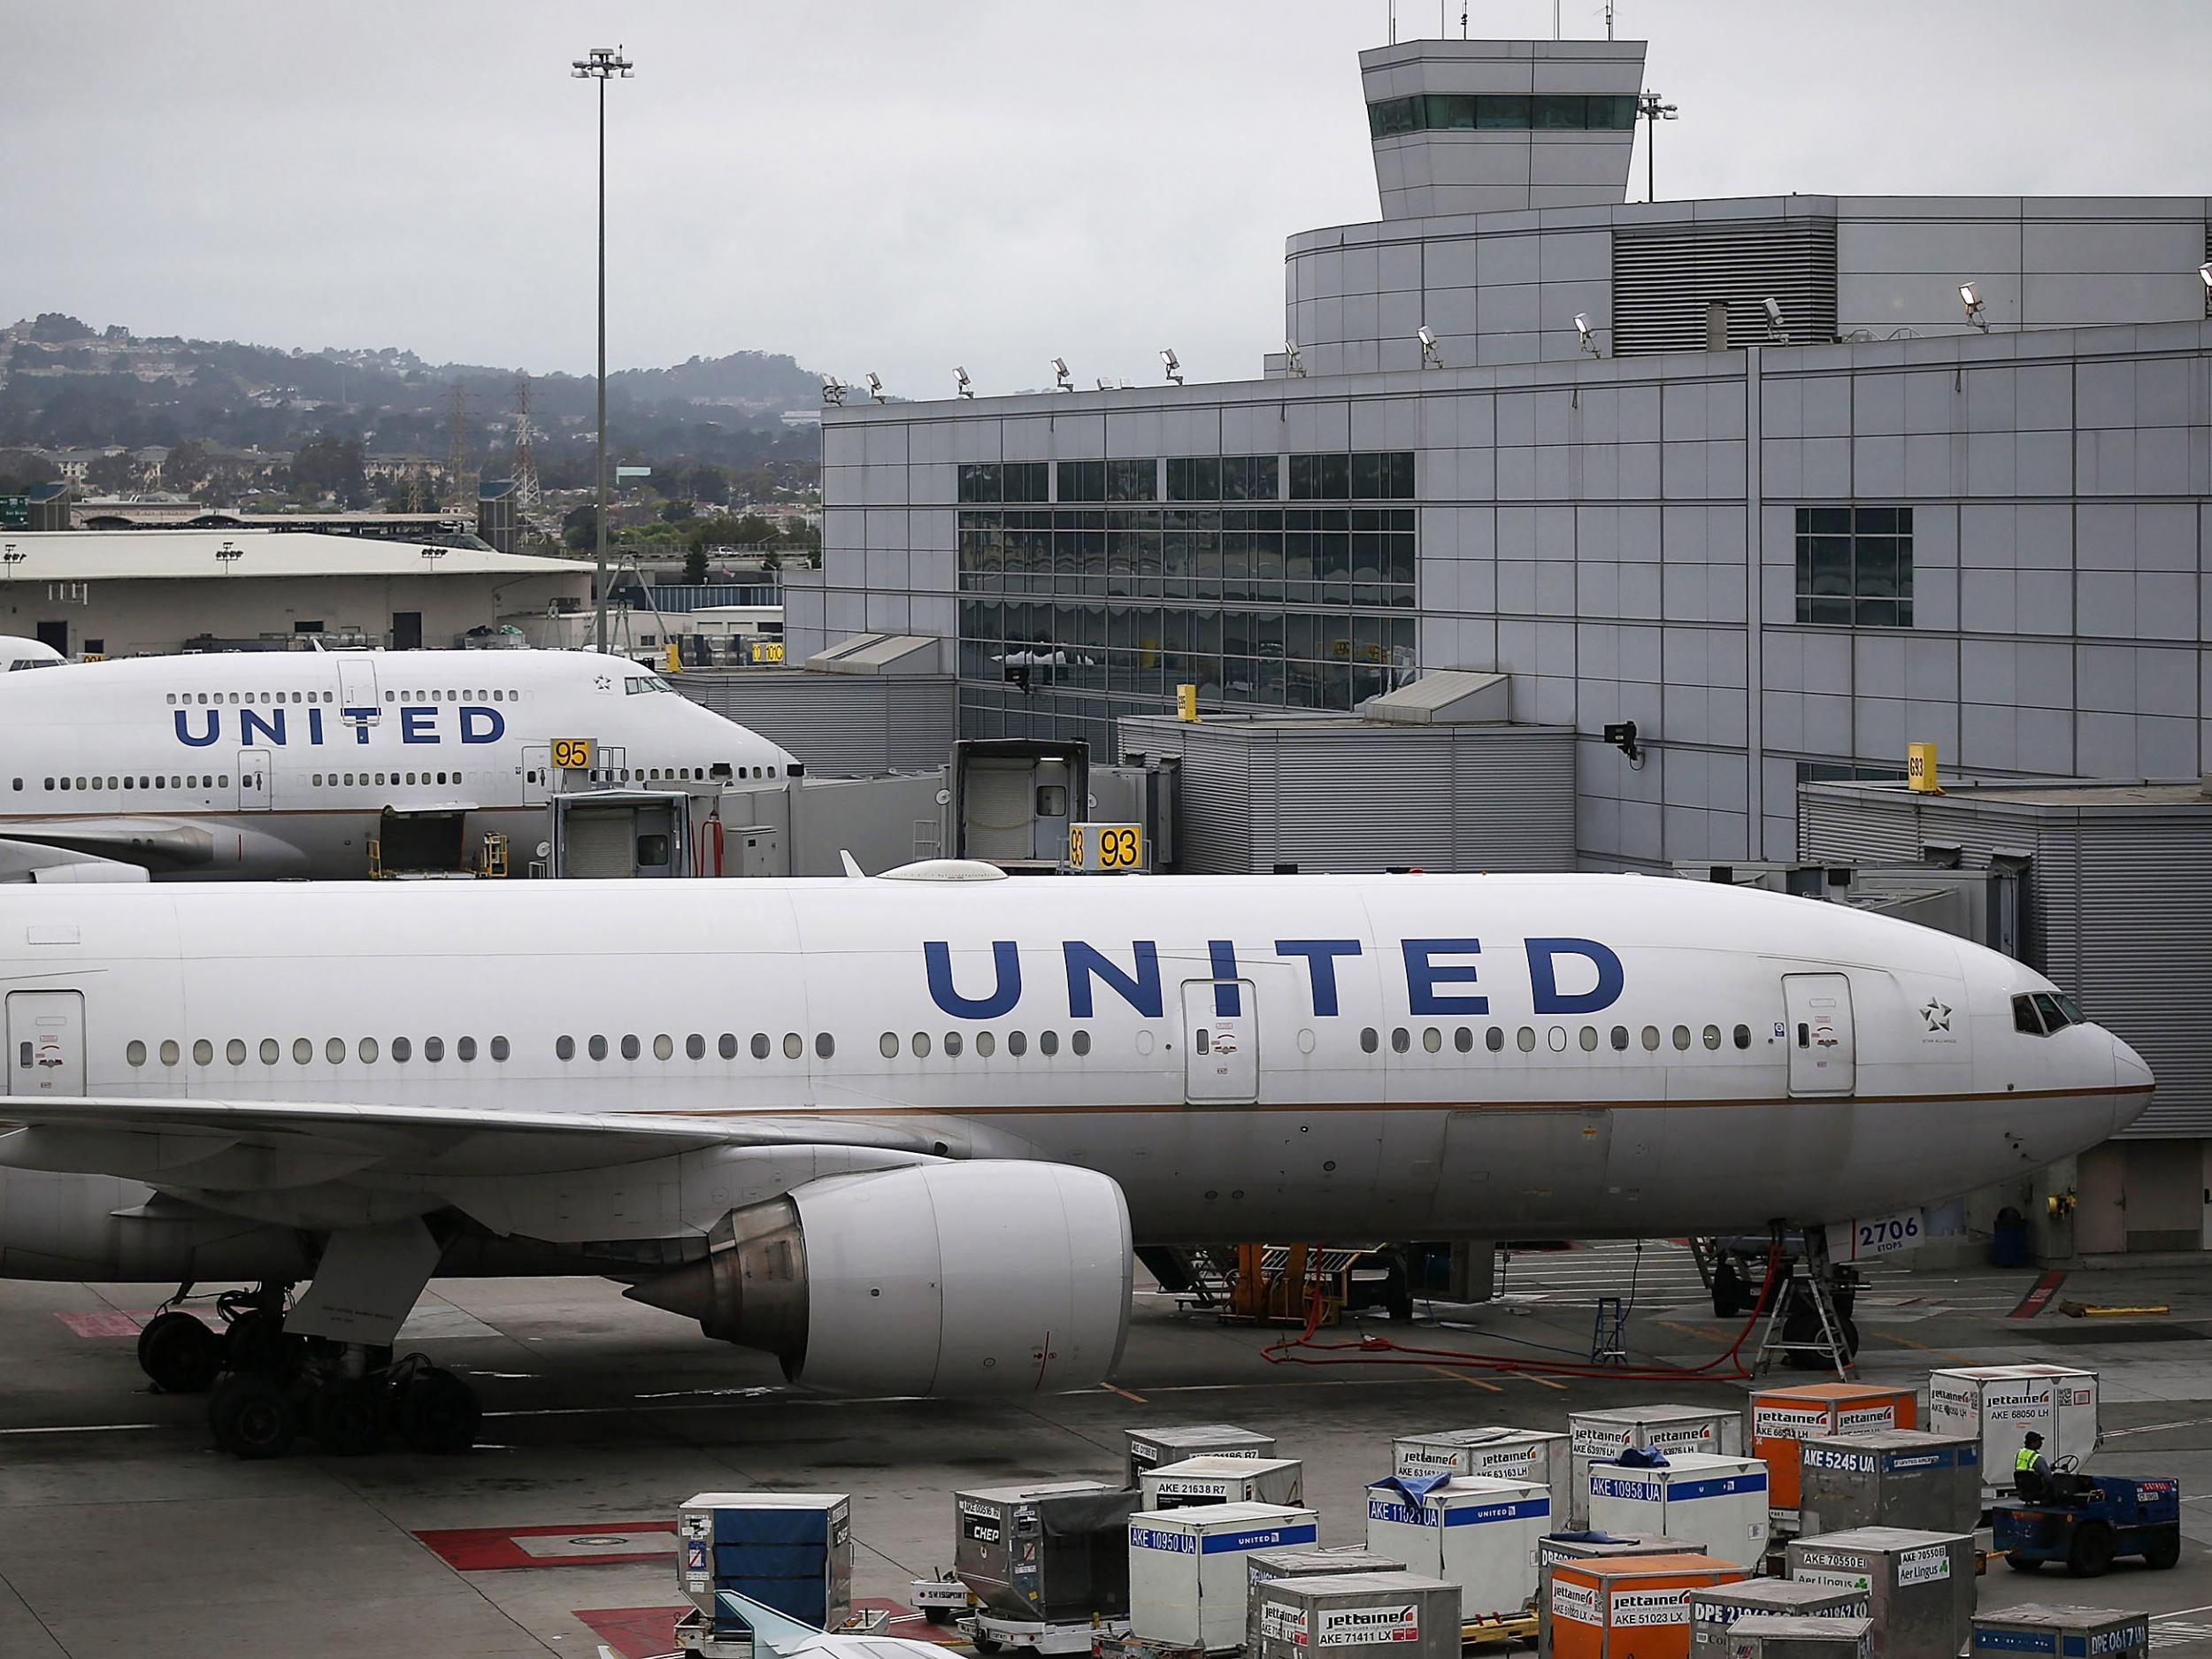 United Airlines said the plane had landed safely despite the problem